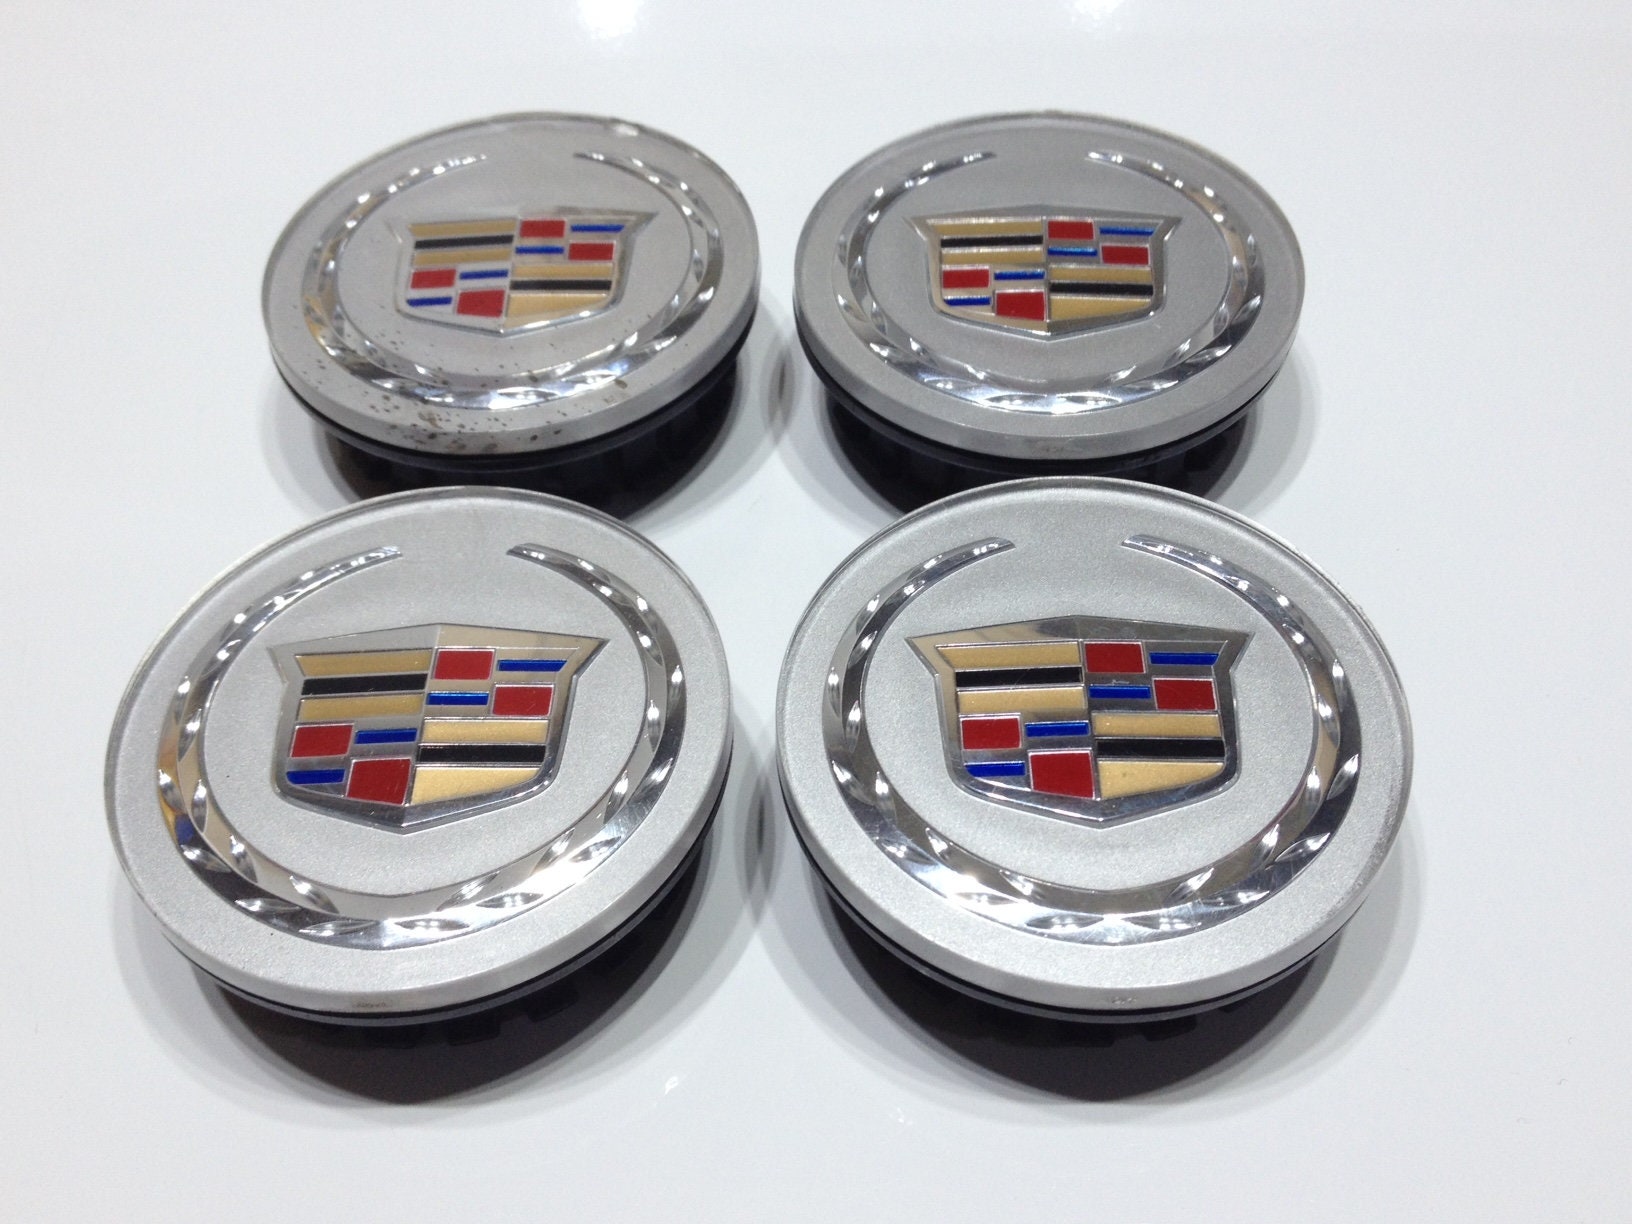 morning 9PCS Adaptation Cadillac 56mm Car Wheel Center Cap Cover Logo Sticker Emblem for Cadillac Matching with Keychain and Tire Valve Stem Caps for Cadillac 